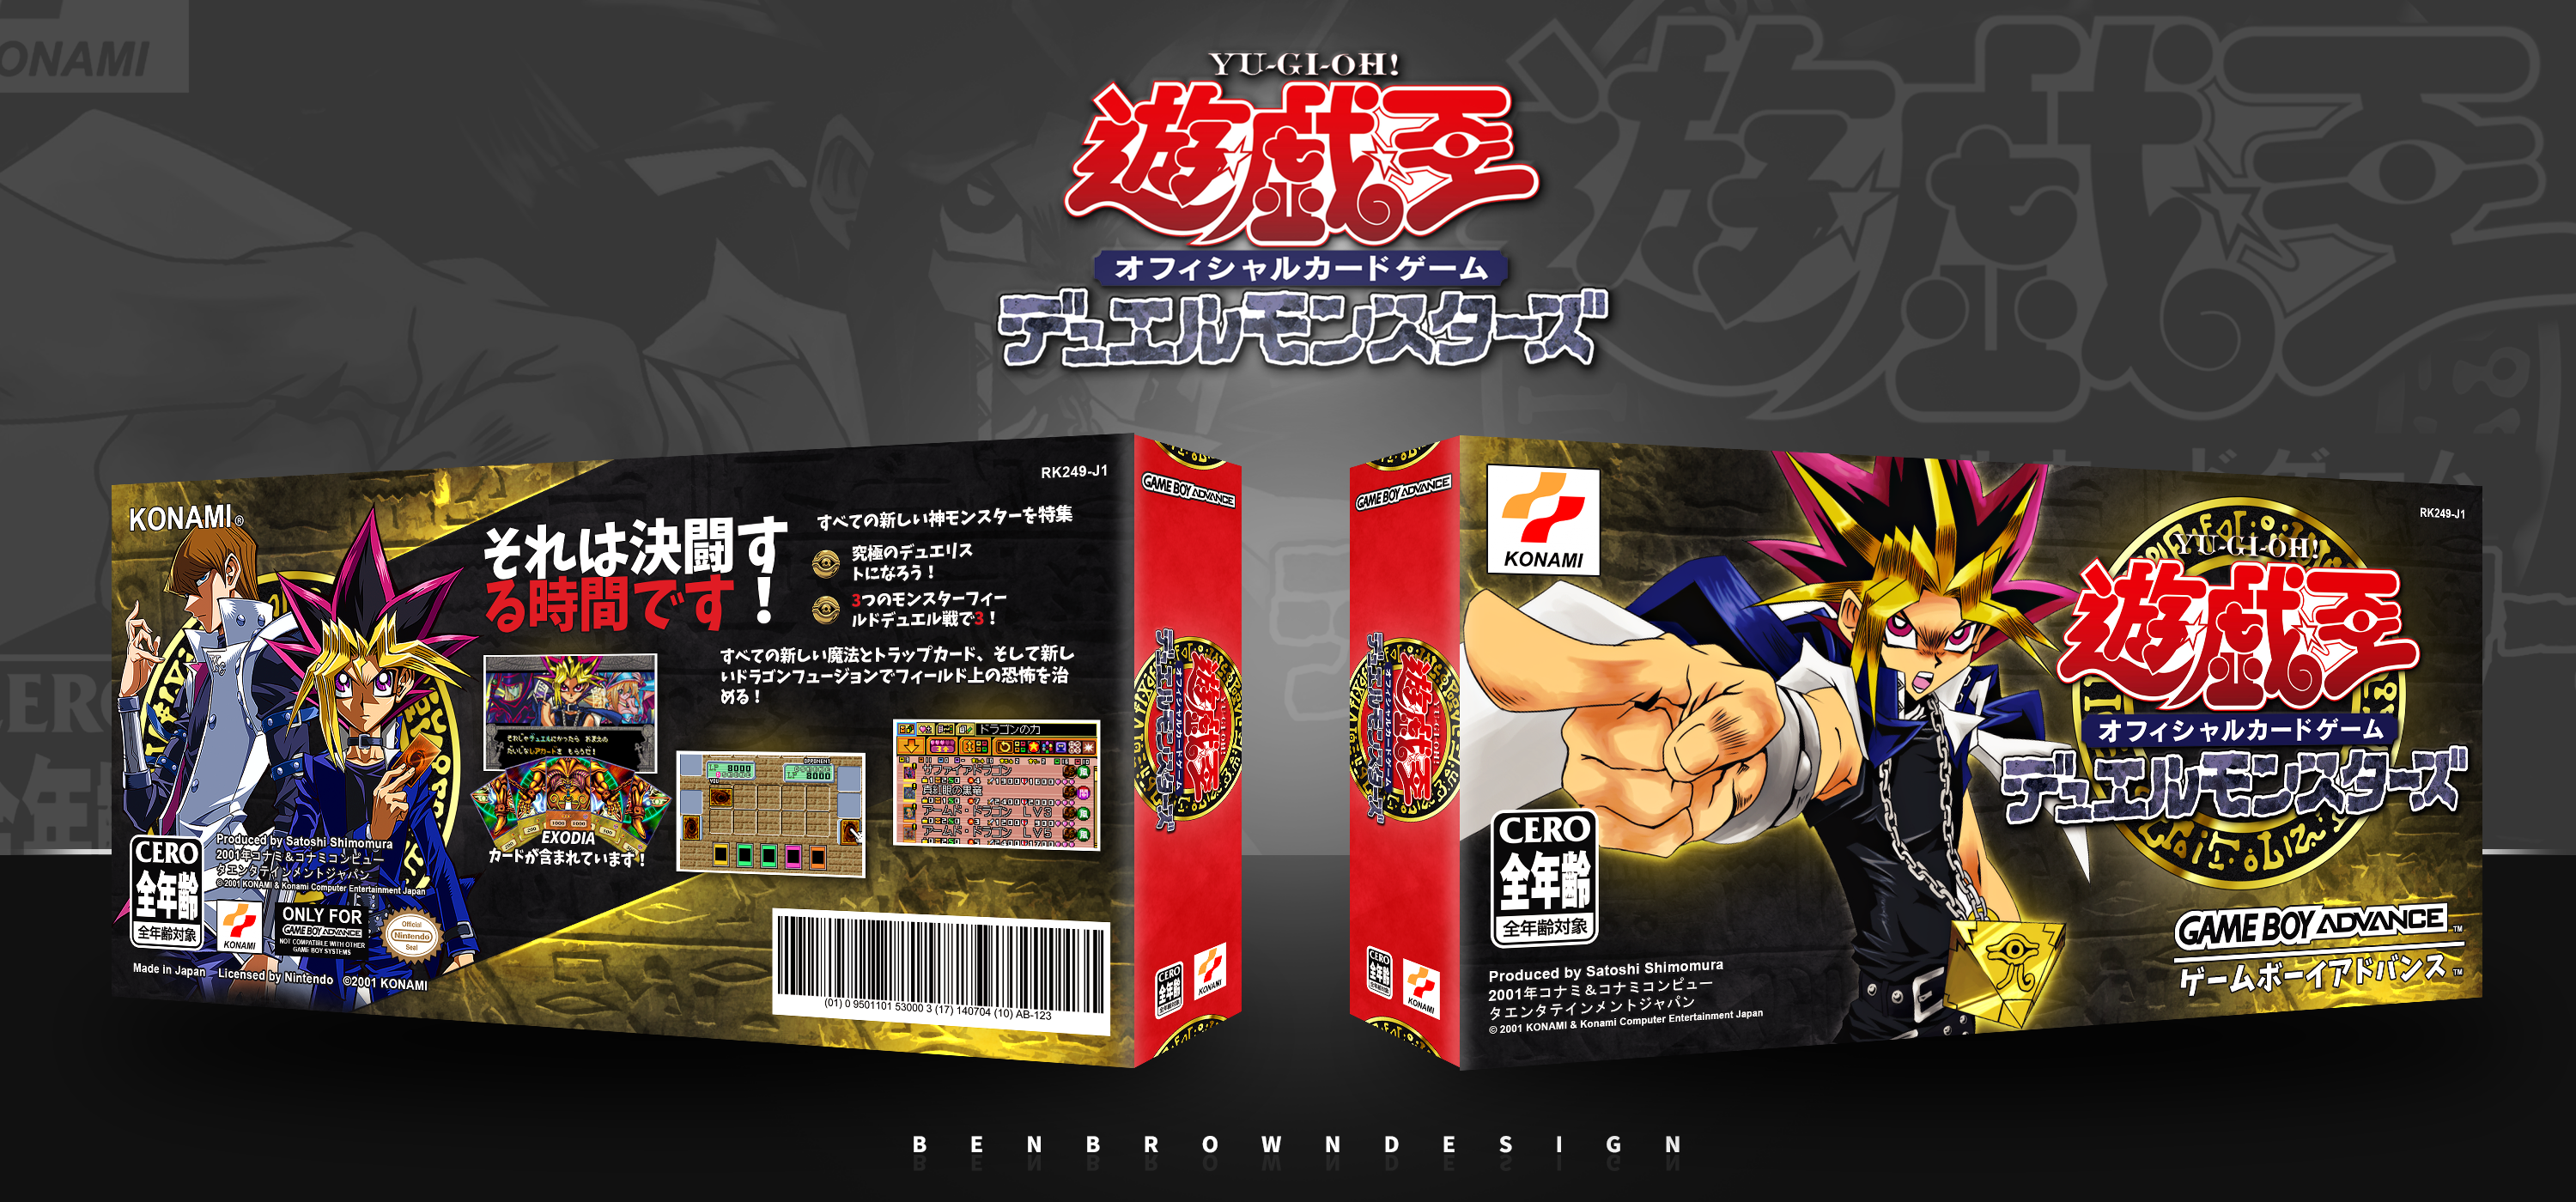 Yu-Gi-Oh! Duel Monsters 5: Expert 1 box cover